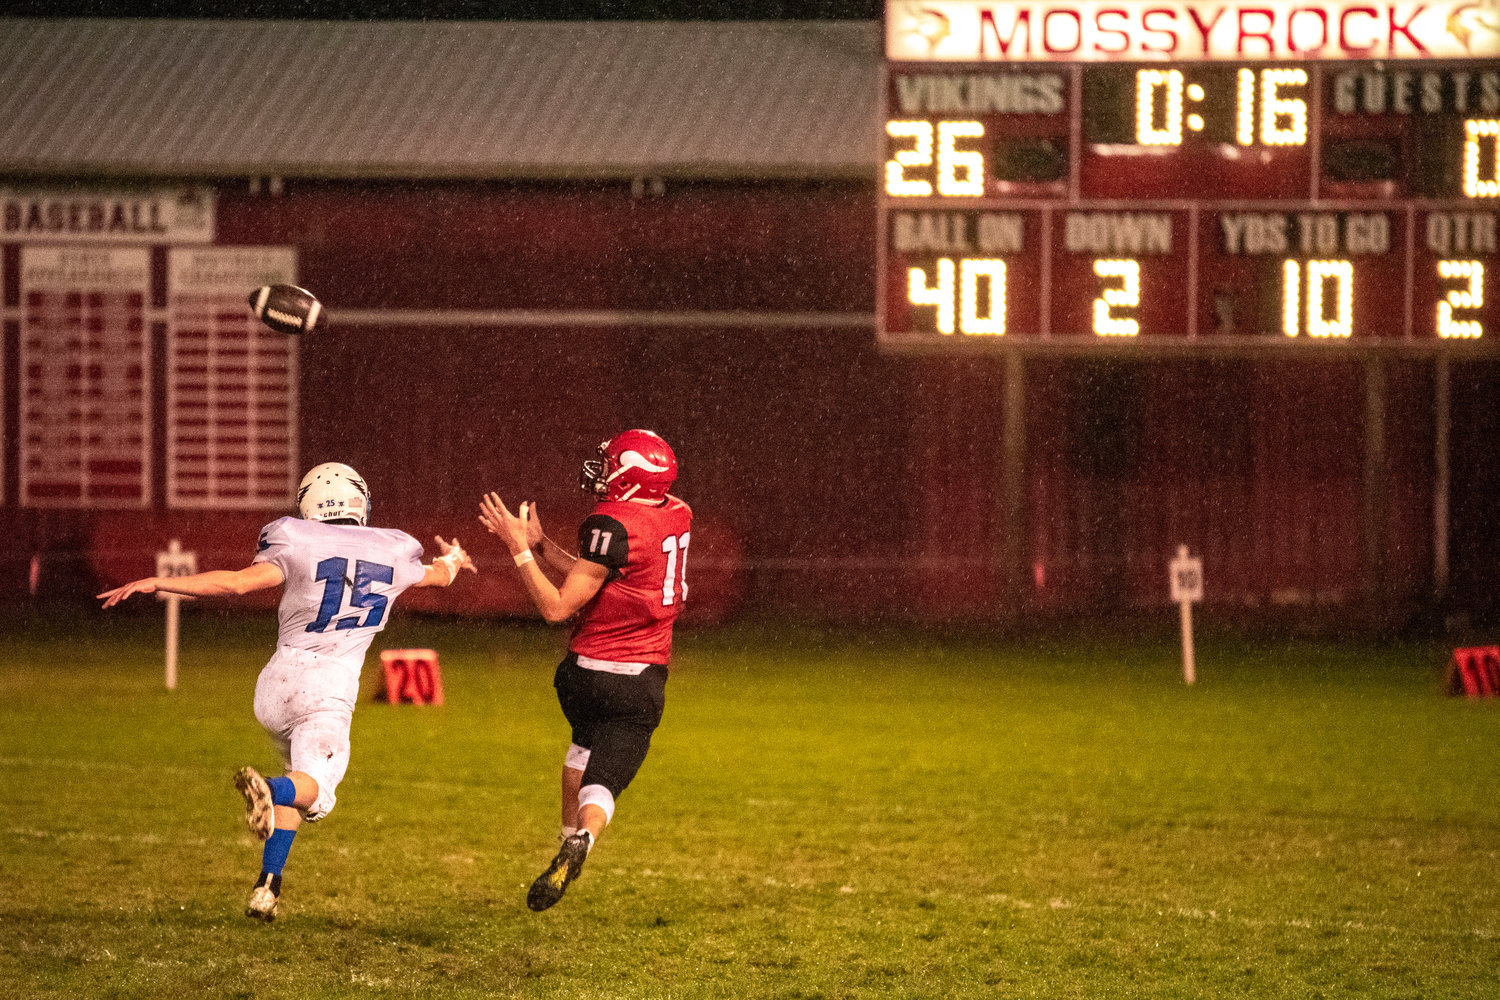 Mossyrock’s Zackary Munoz (11) makes a long reception during a game against Toutle Lake Thursday night.